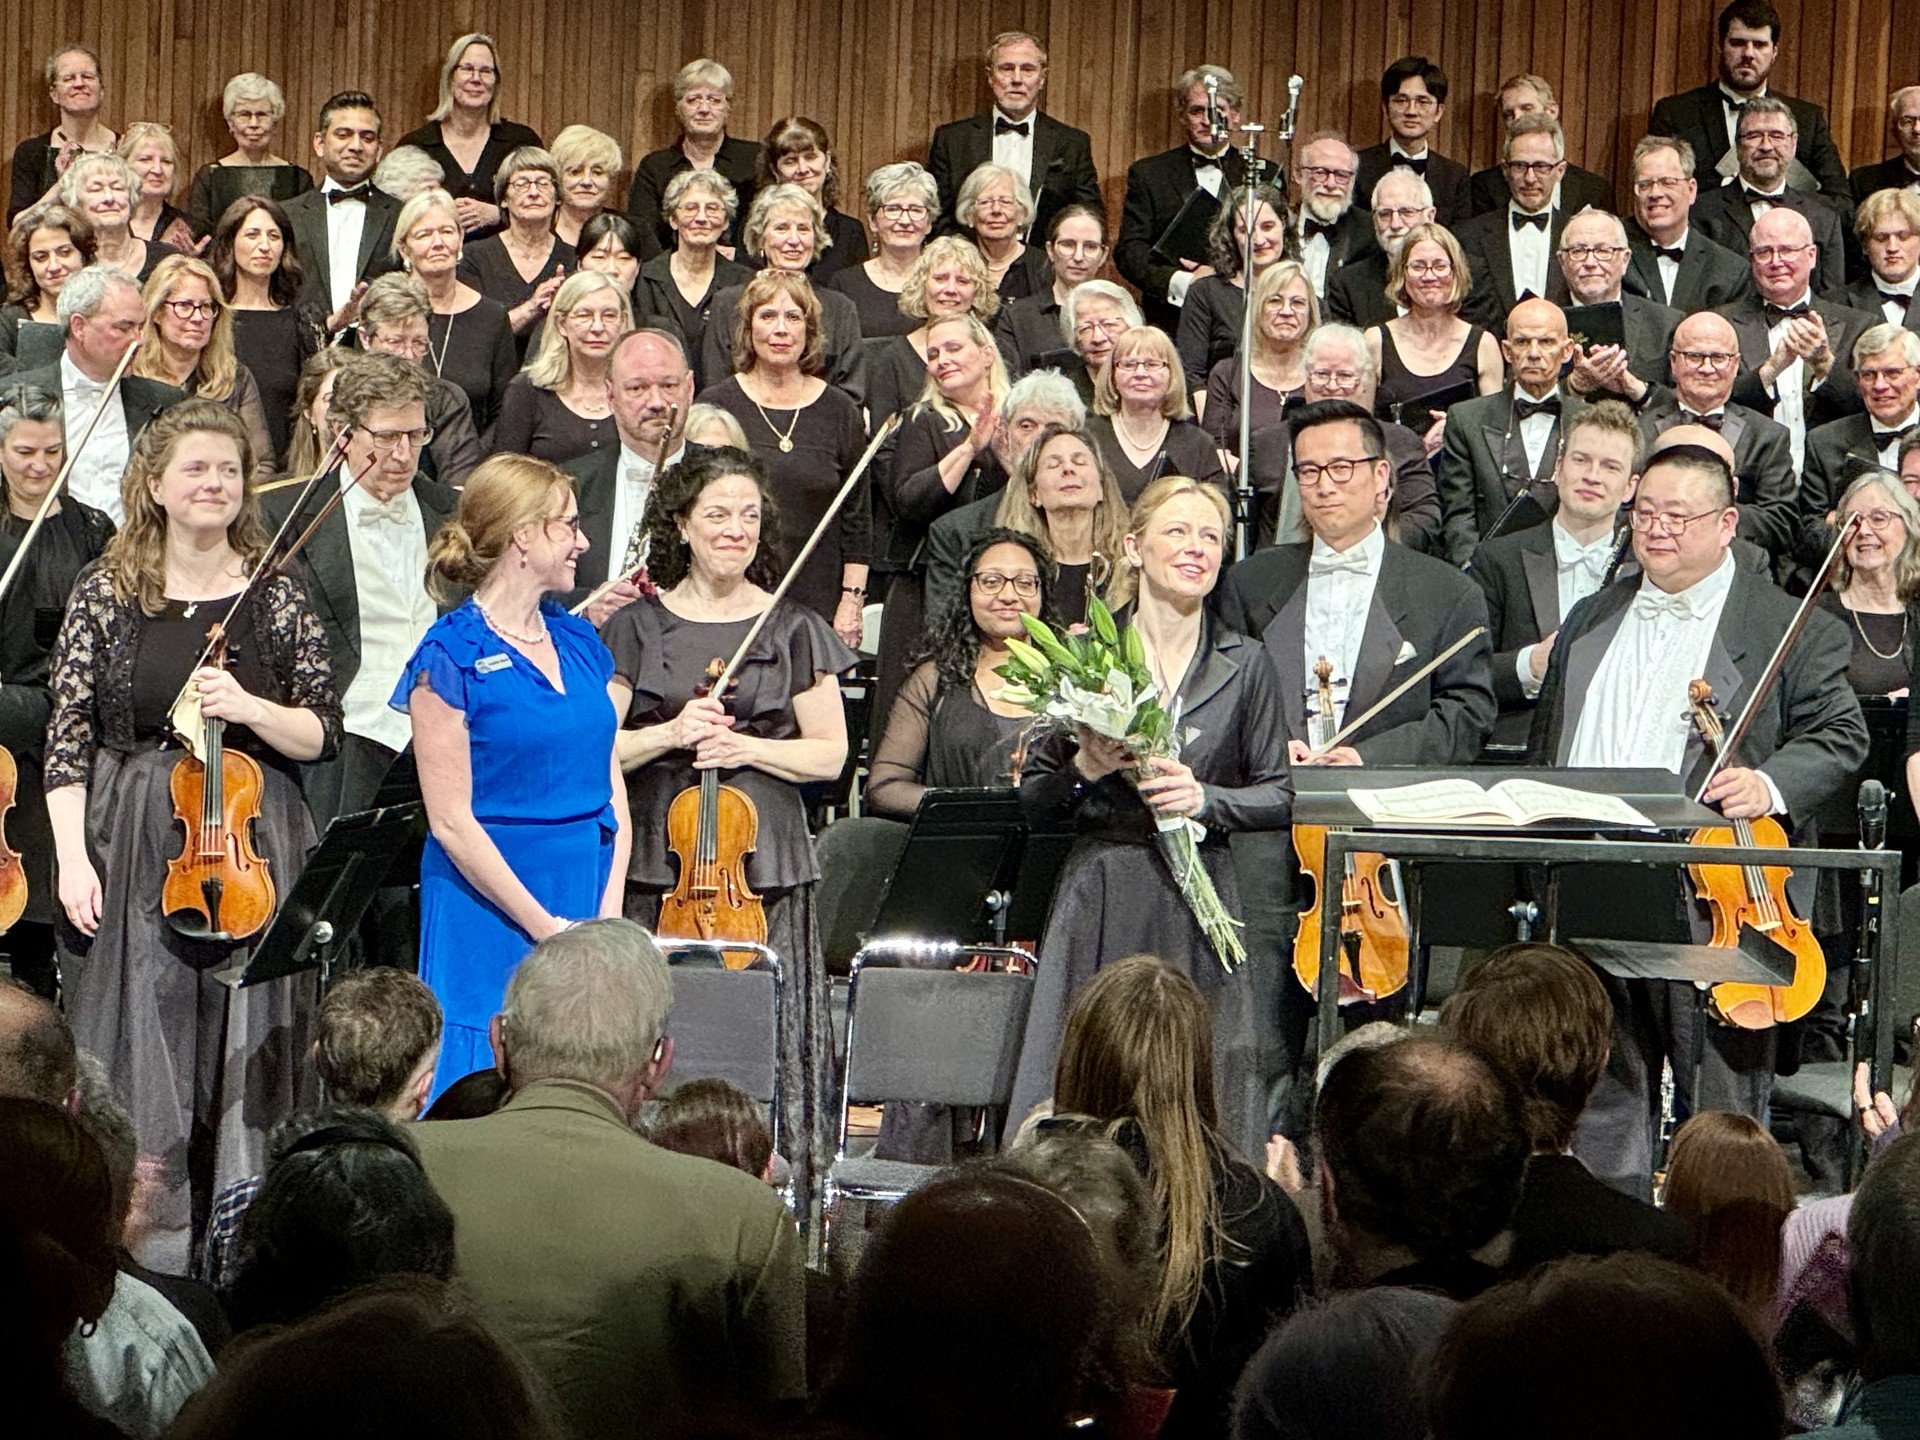 @GemmaNewMusic leading the @HamiltonPhilharmonic in her final concerts as Music Director celebrating her 9 year tenure! She led the orchestra in a special Intimate &amp; Immersive concert as well as Beethoven&rsquo;s Symphony No. 9 with soprano @Carl